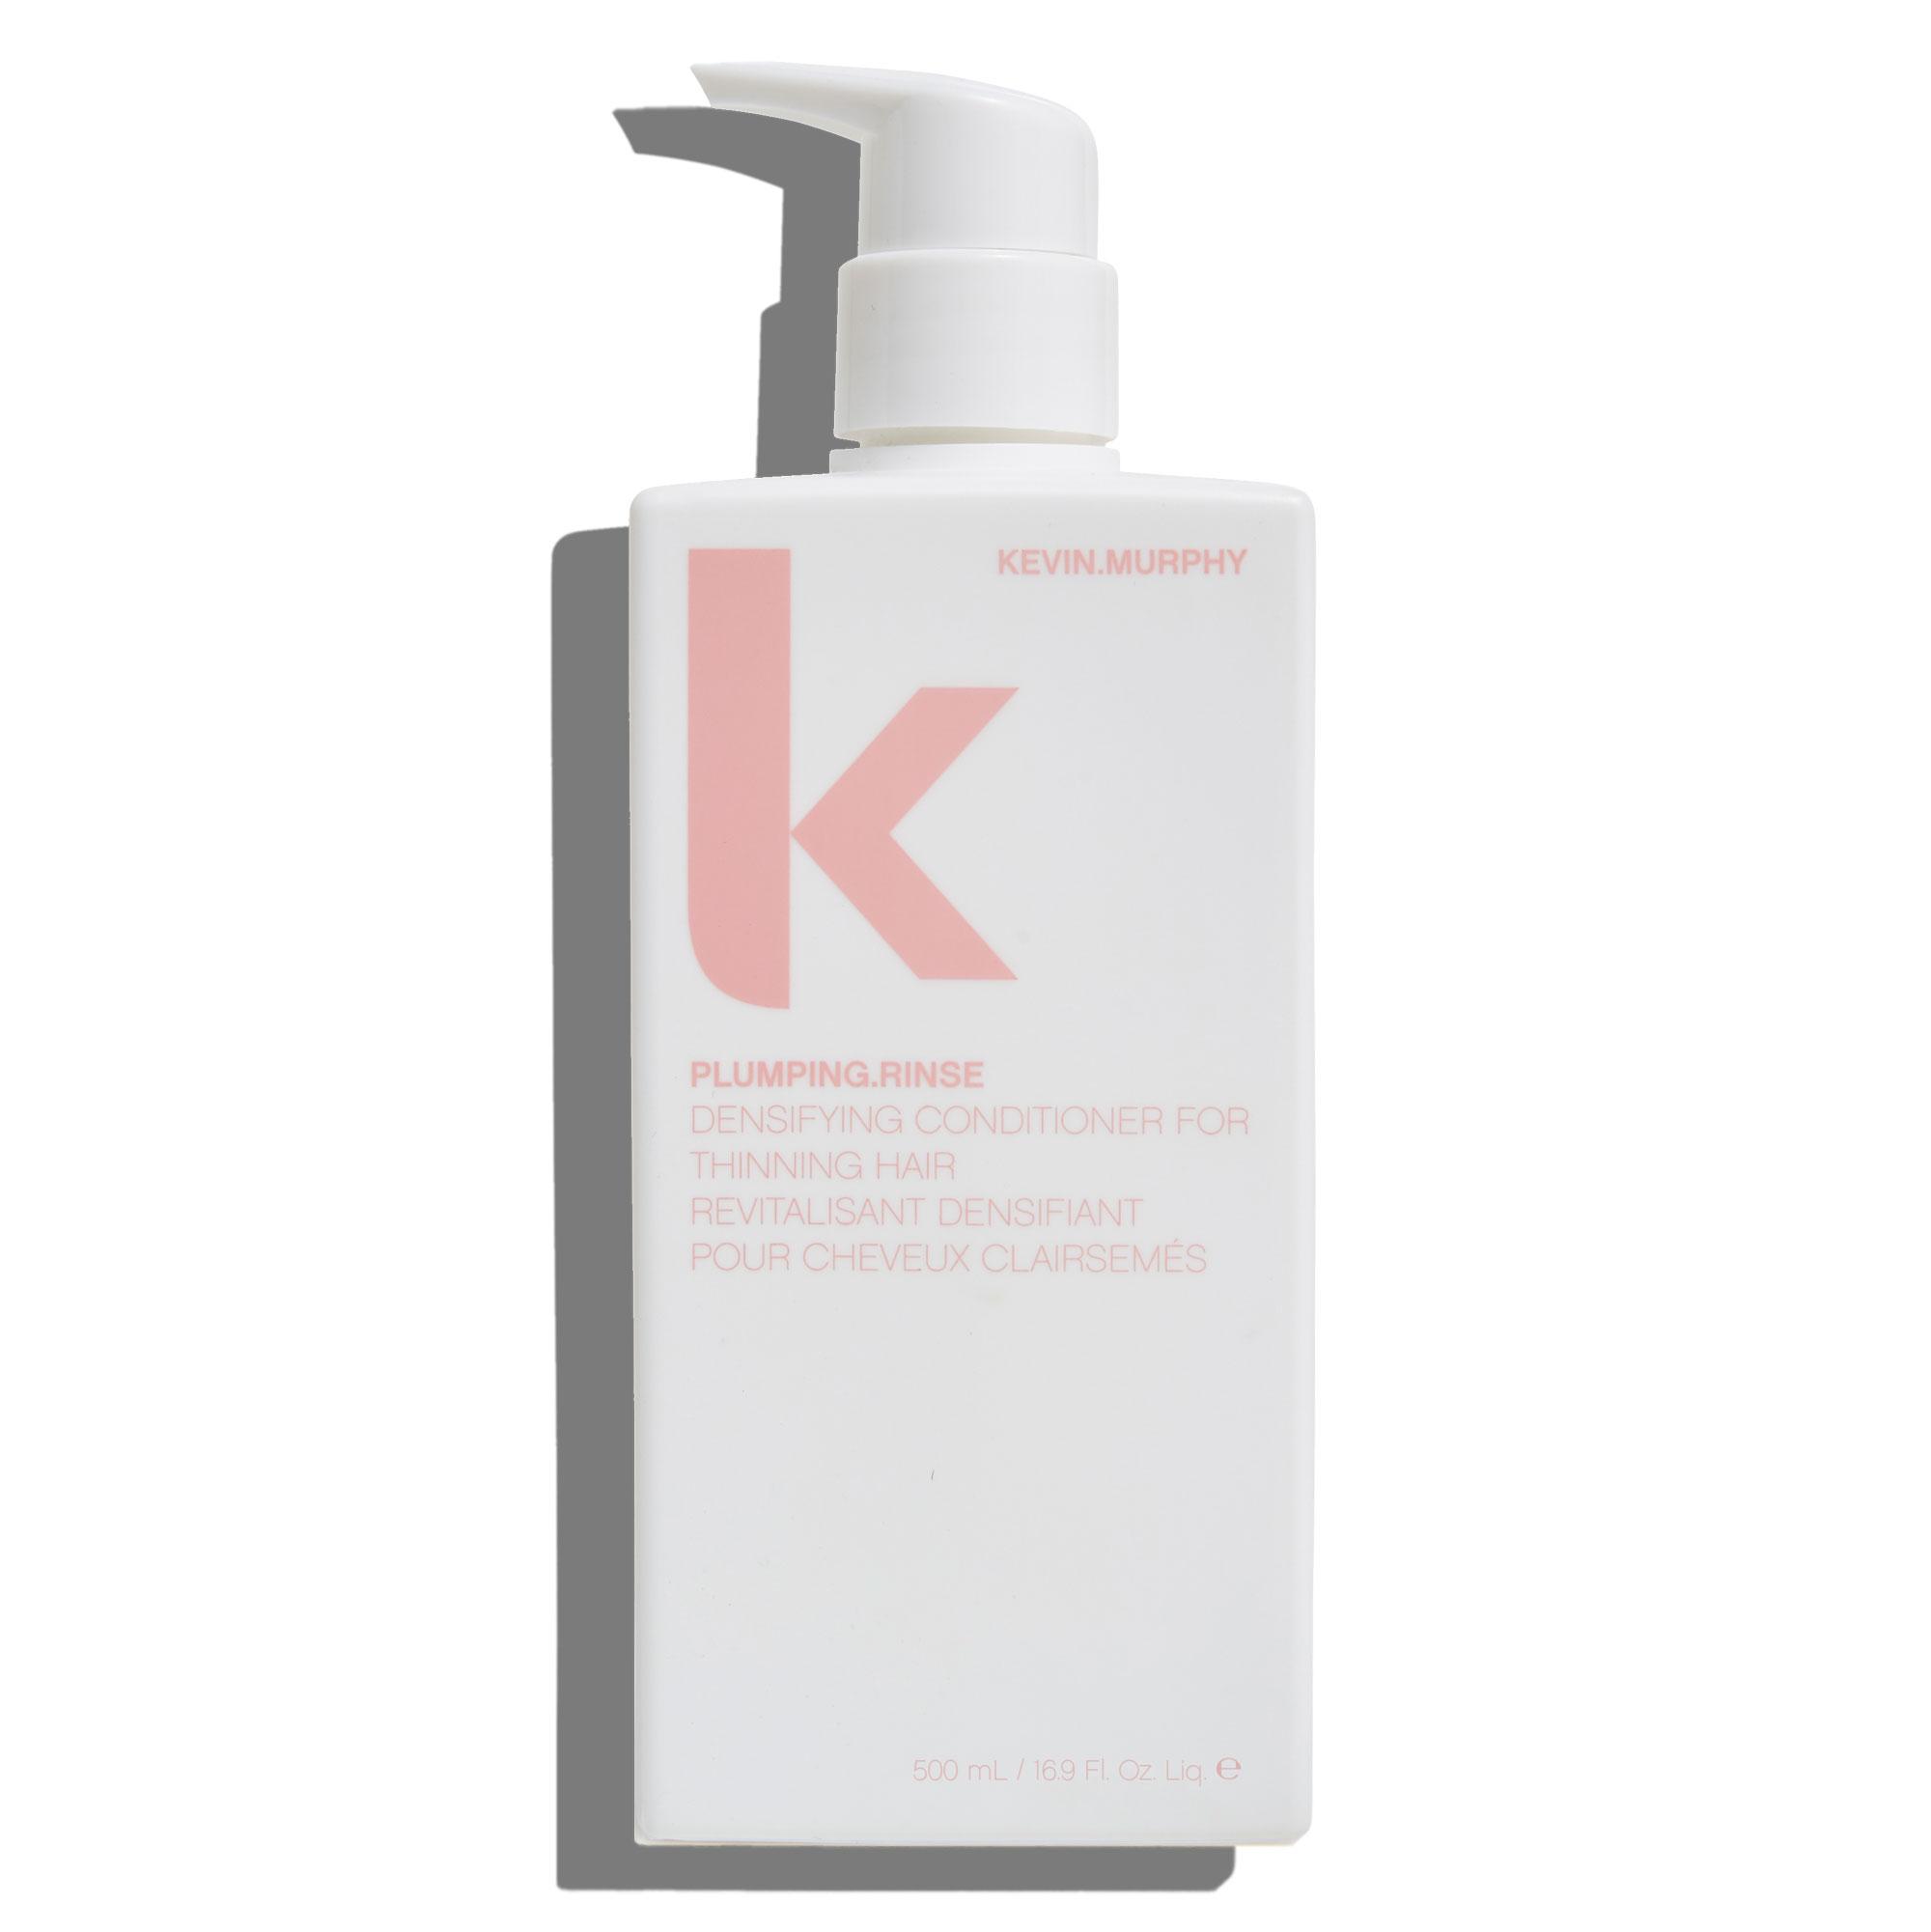 KEVIN.MURPHY PLUMPING.RINSE (Limited Edition)